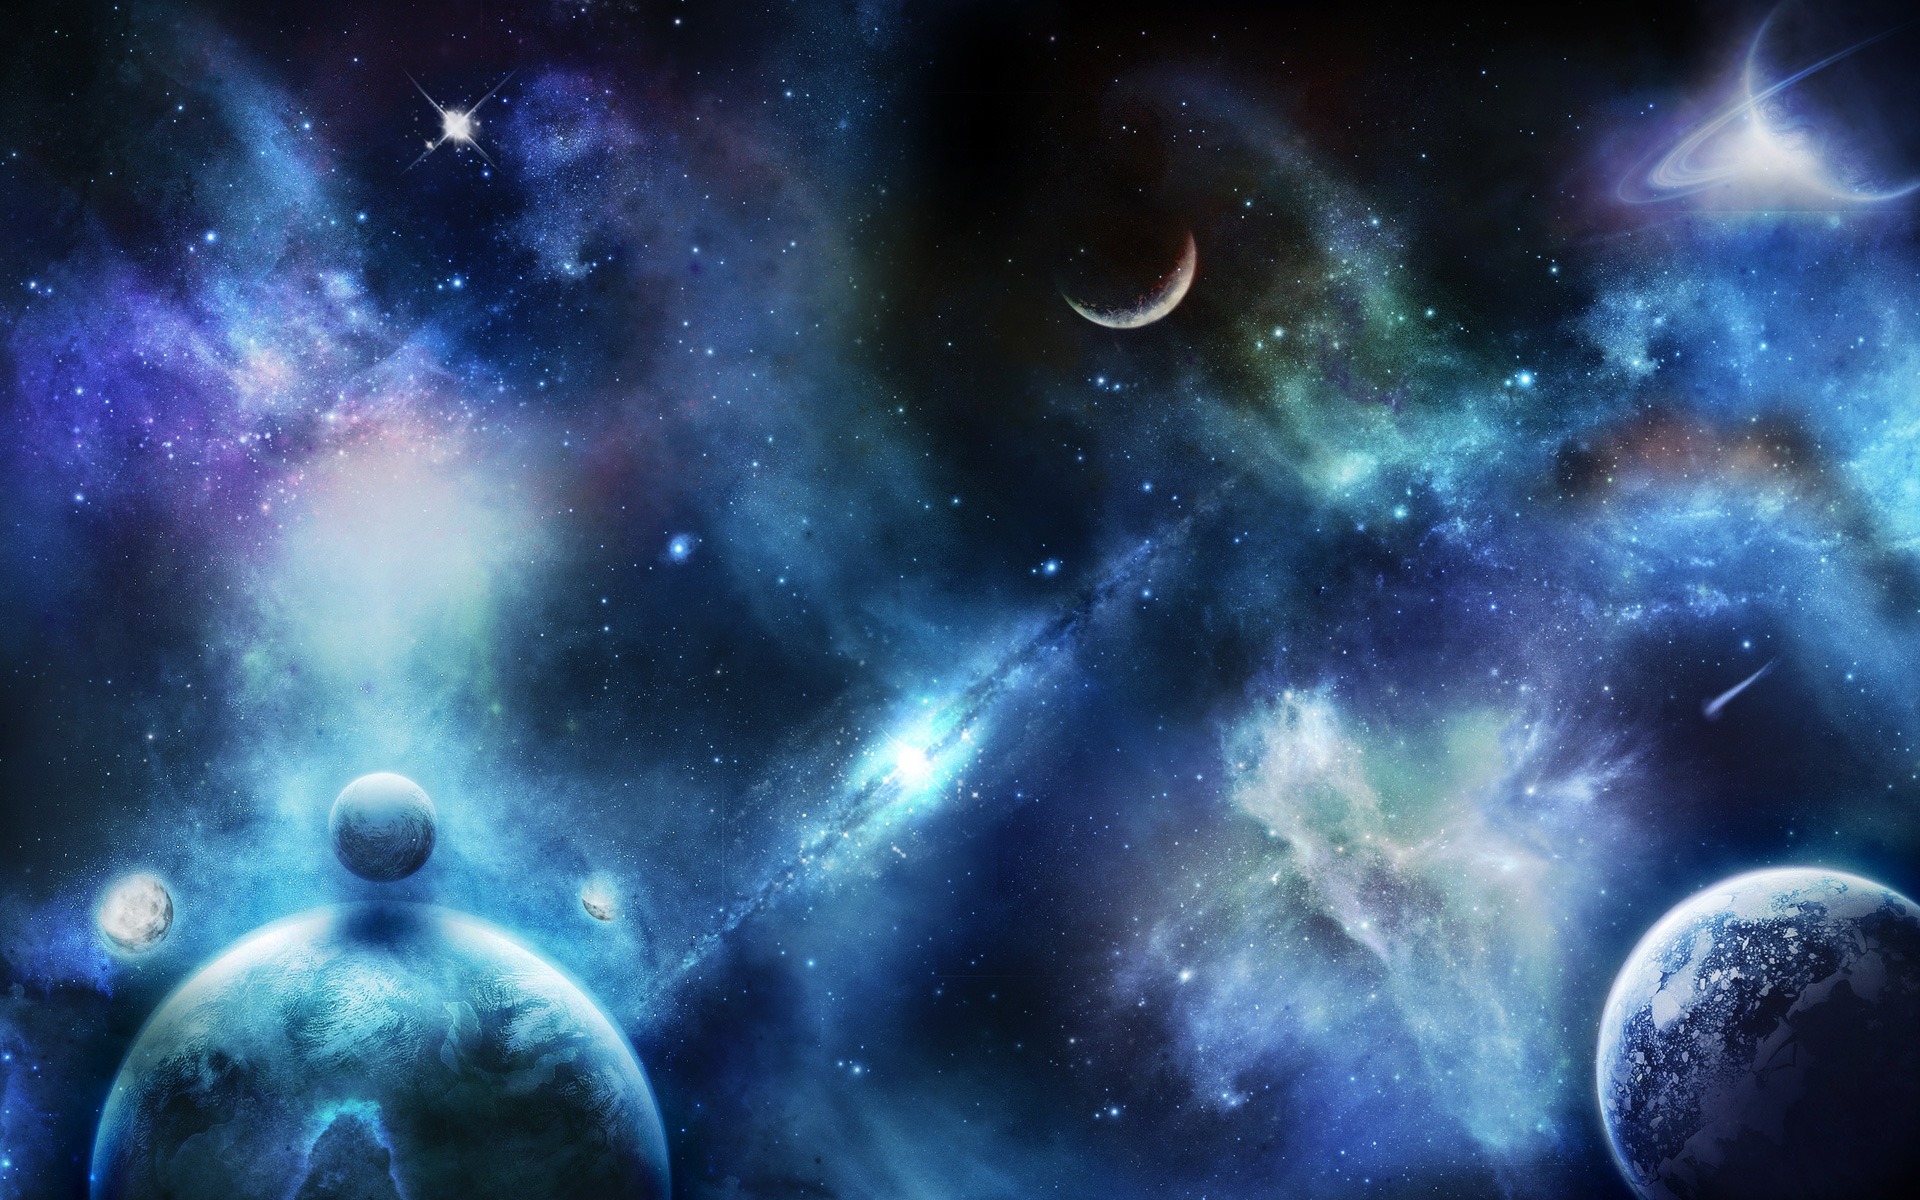 Spacescape Wallpaper Space Nature In Jpg Format For